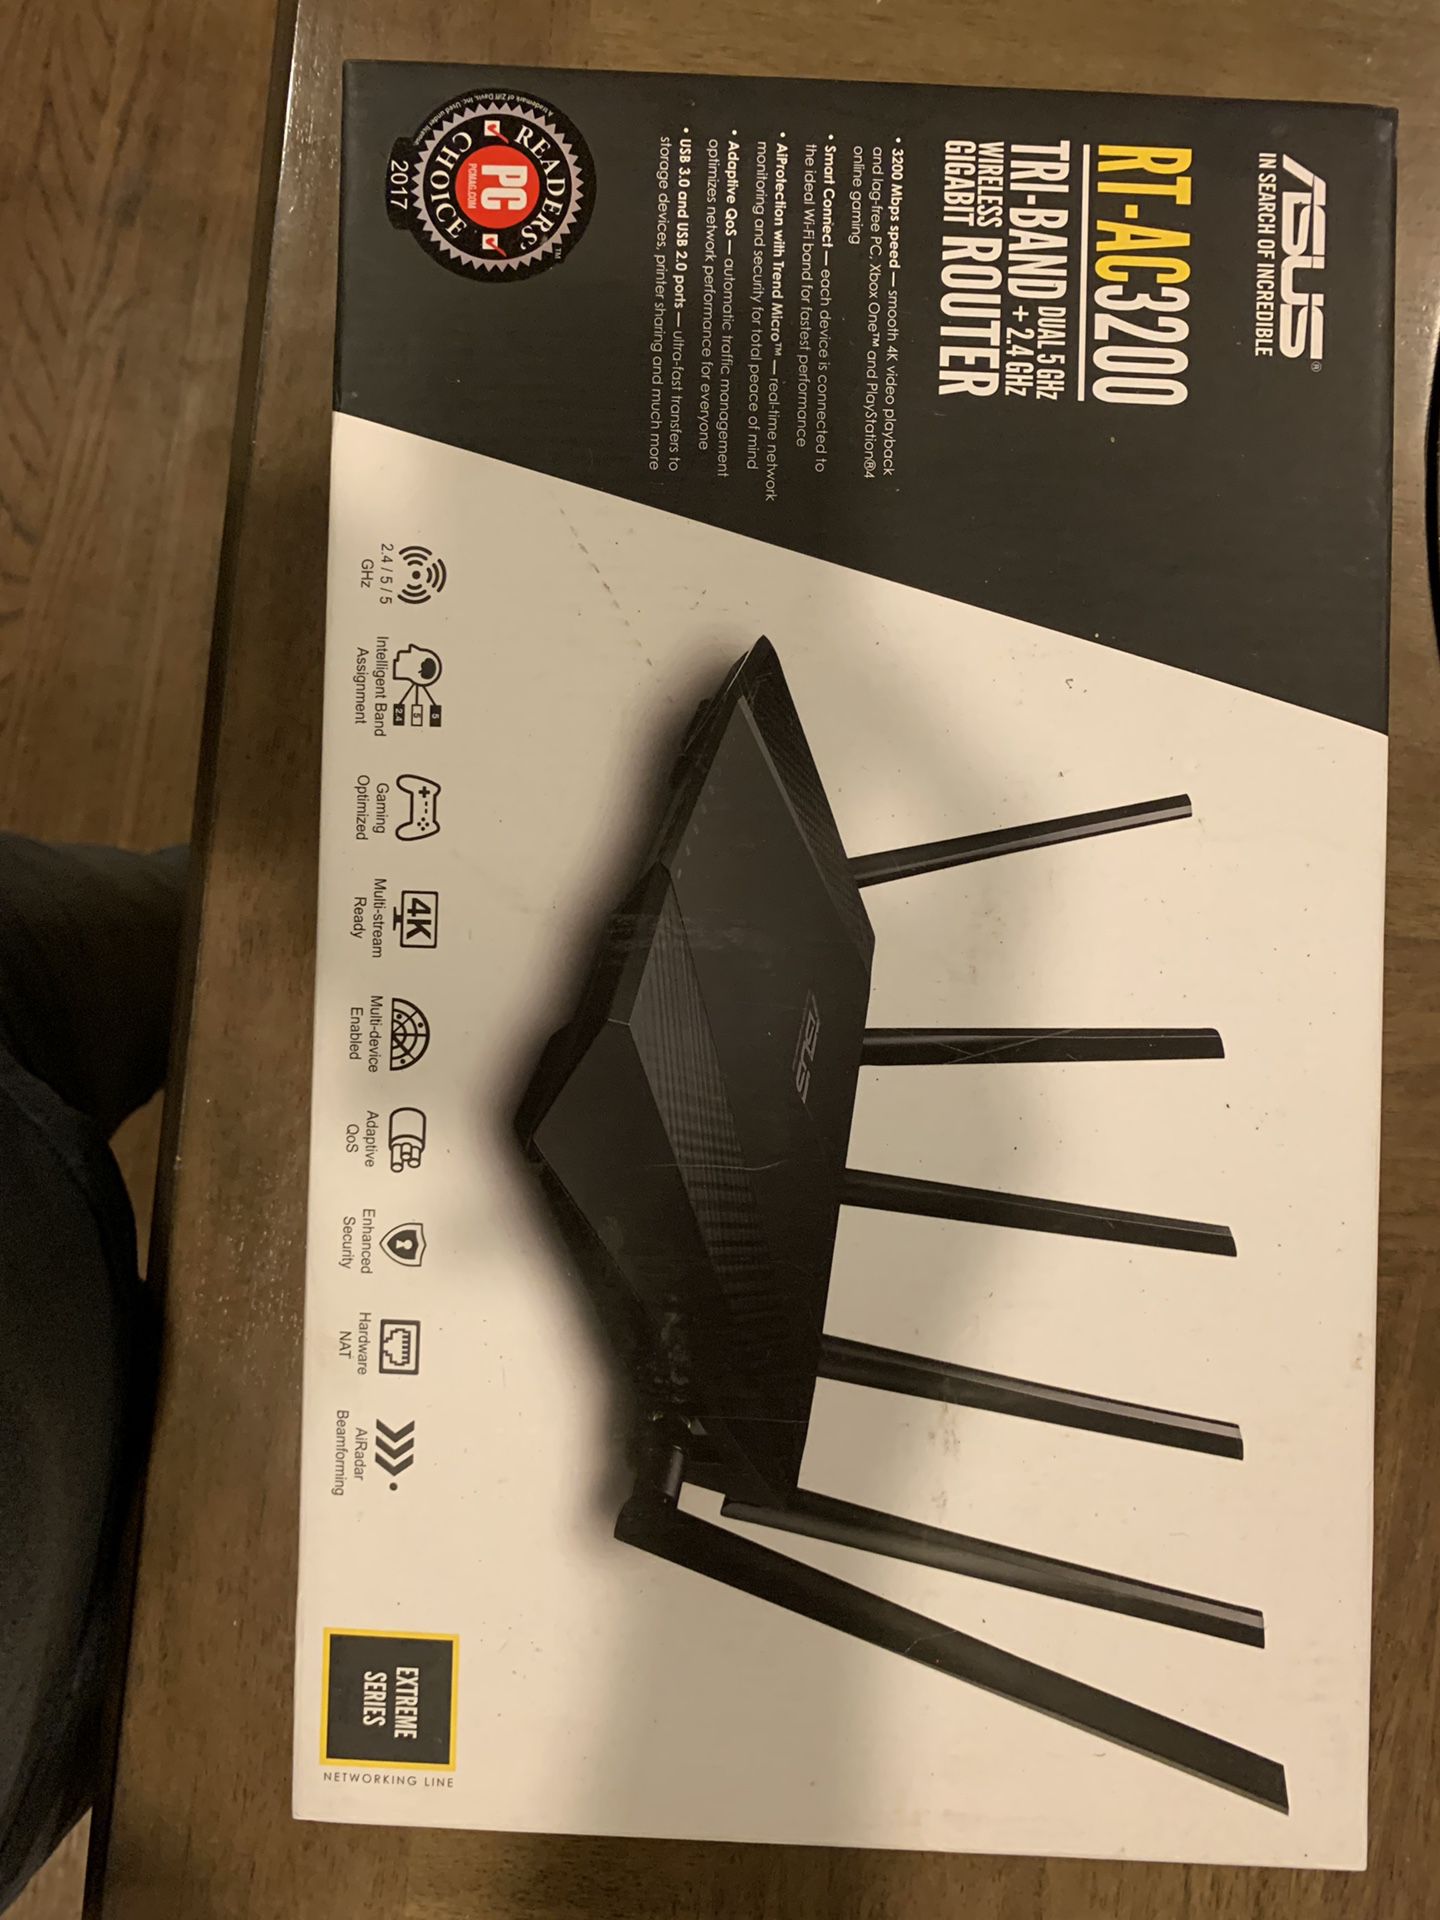 Asus RT-AC3200 triband dual 5 ghz + 2.4ghz wireless gigabite router